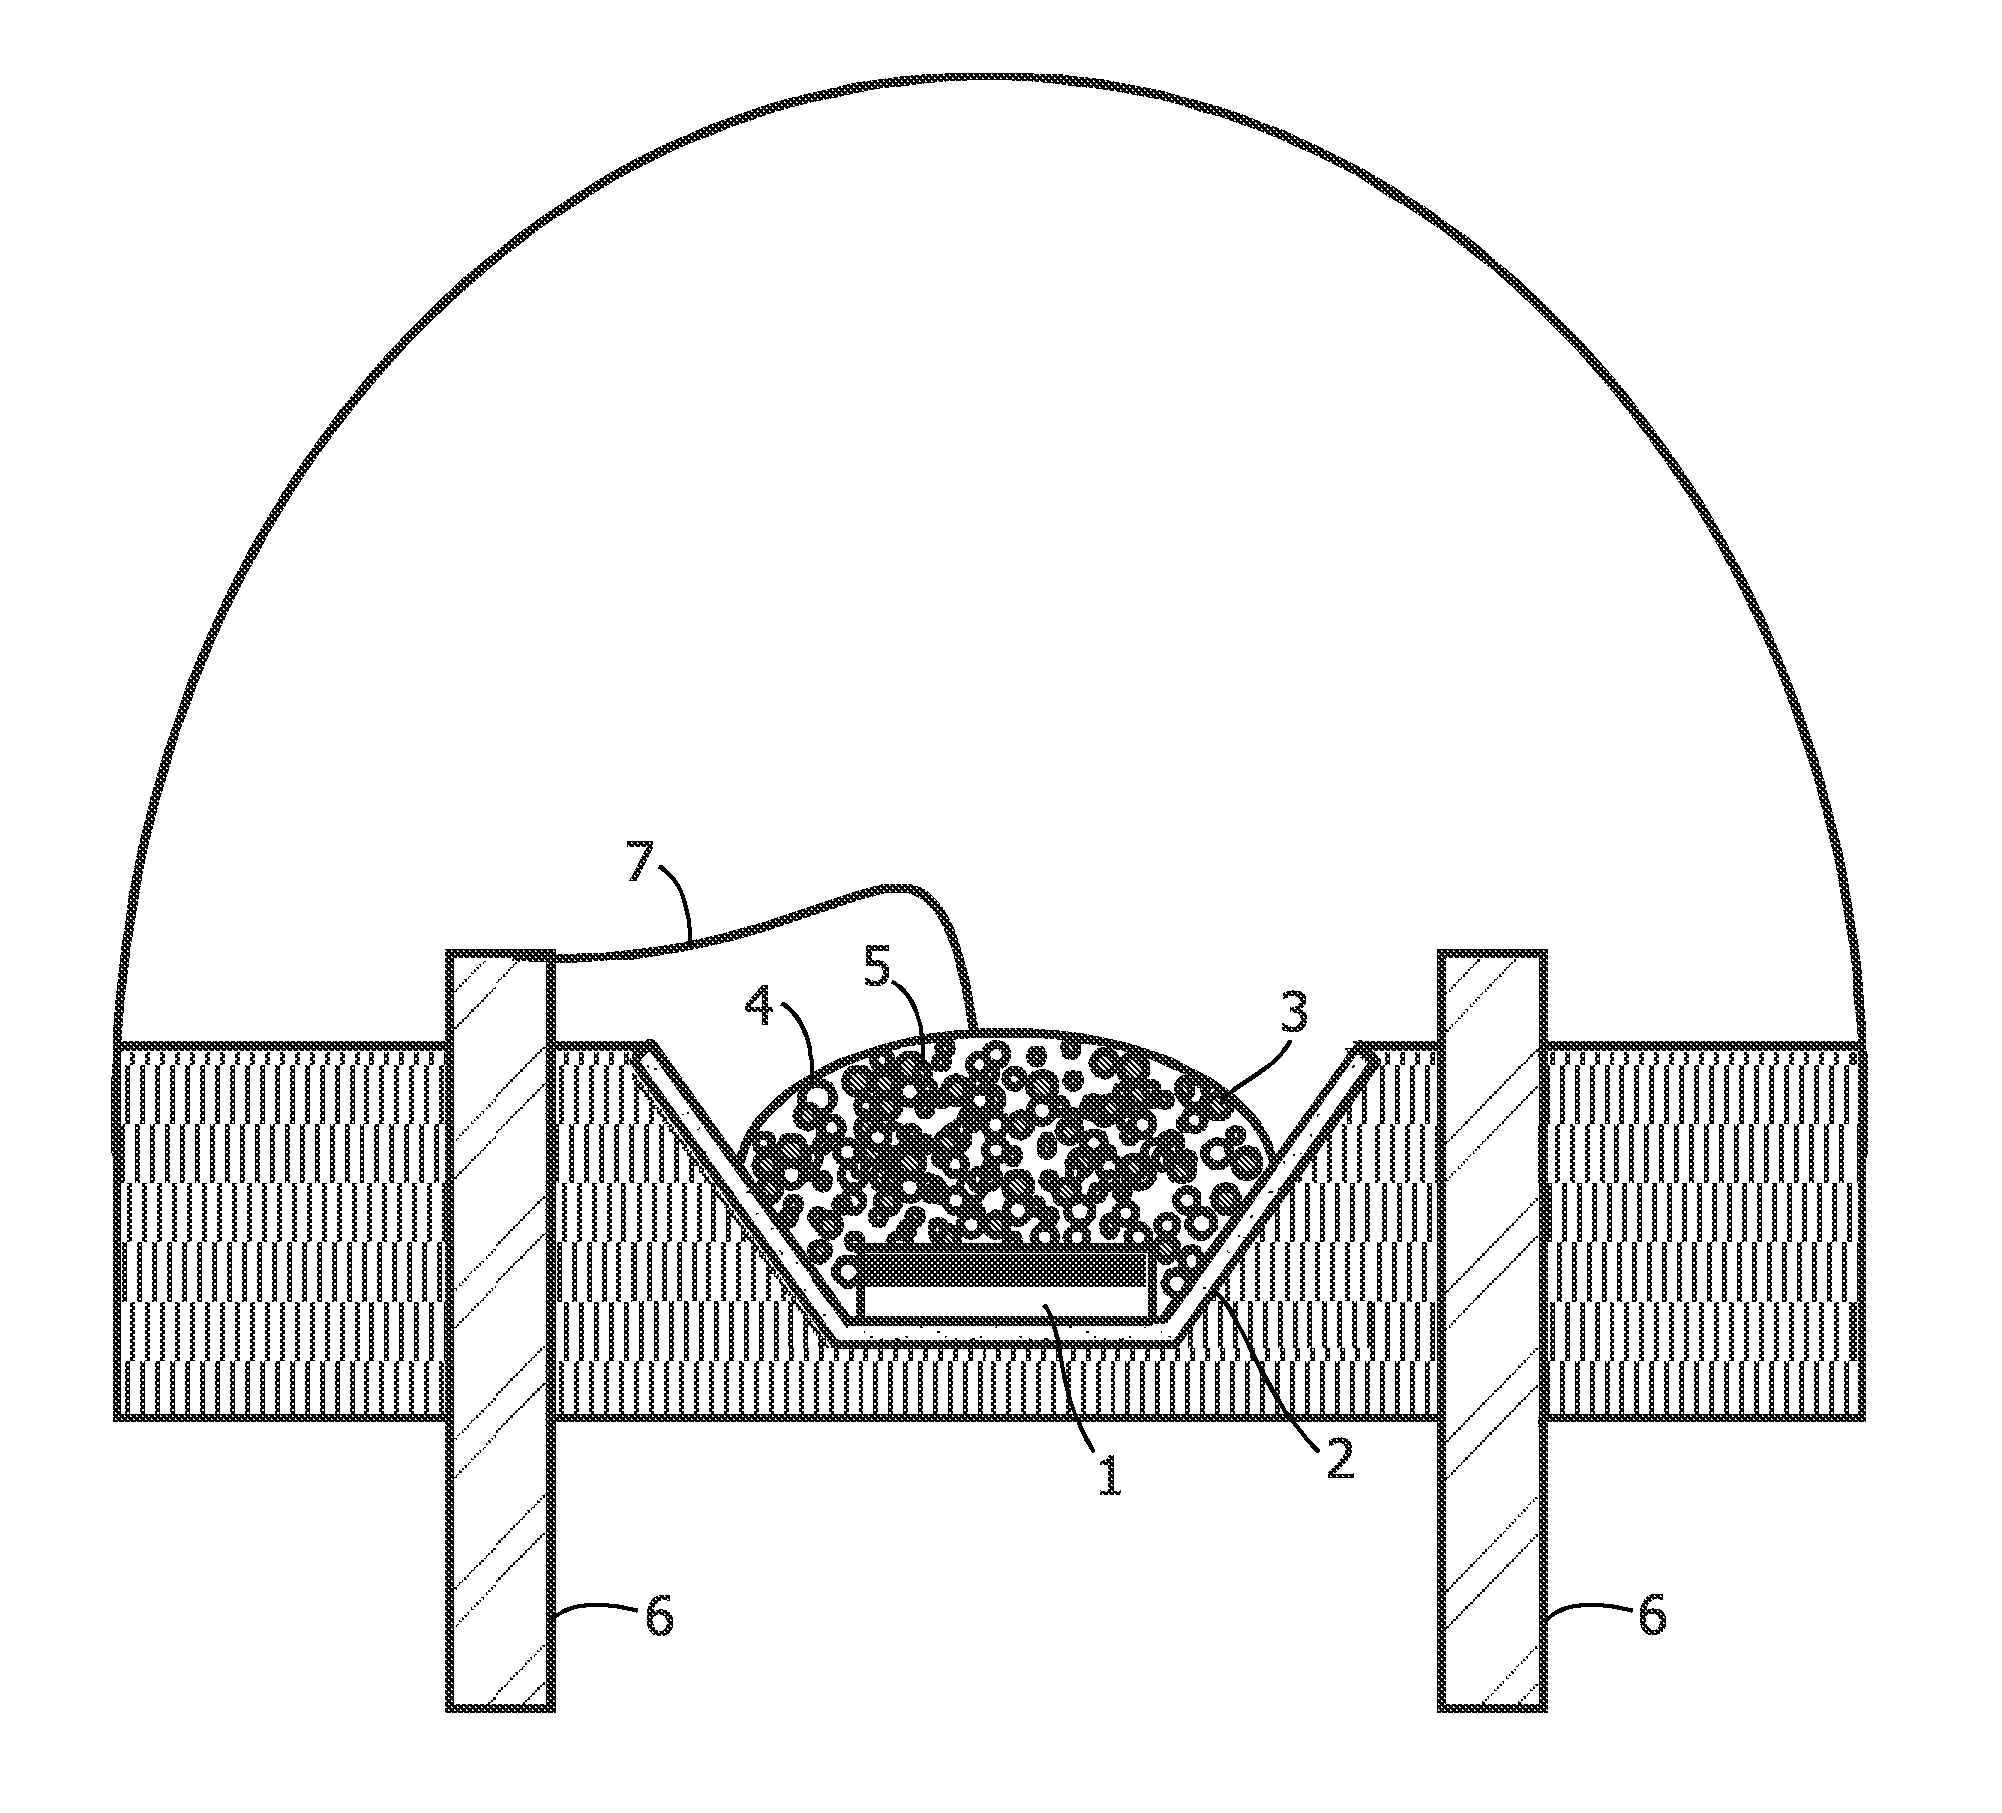 Illumination system comprising color deficiency compensating luminescent material